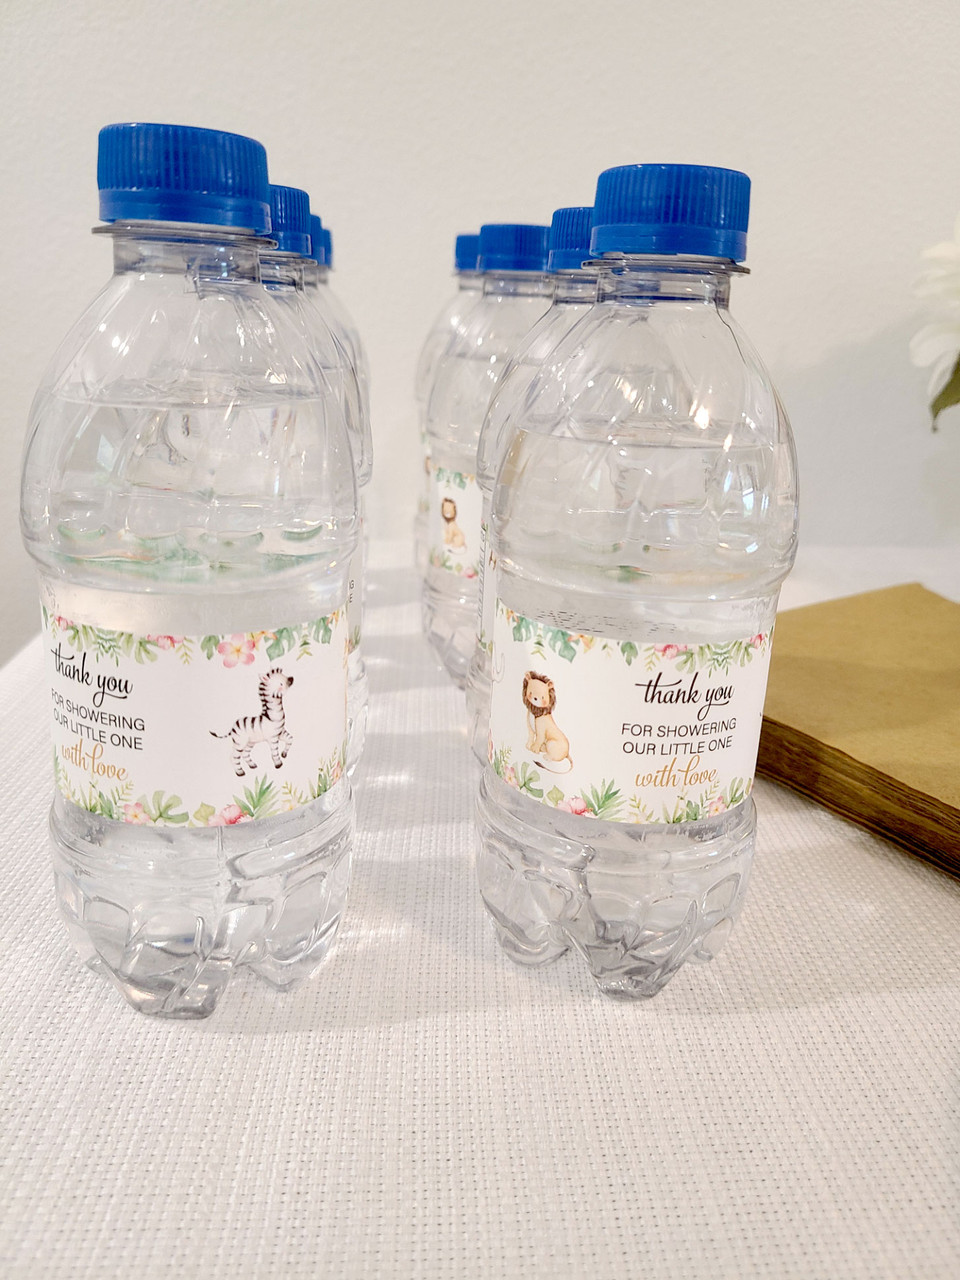 Water Bottle Stickers - Fast Printing & Free Delivery